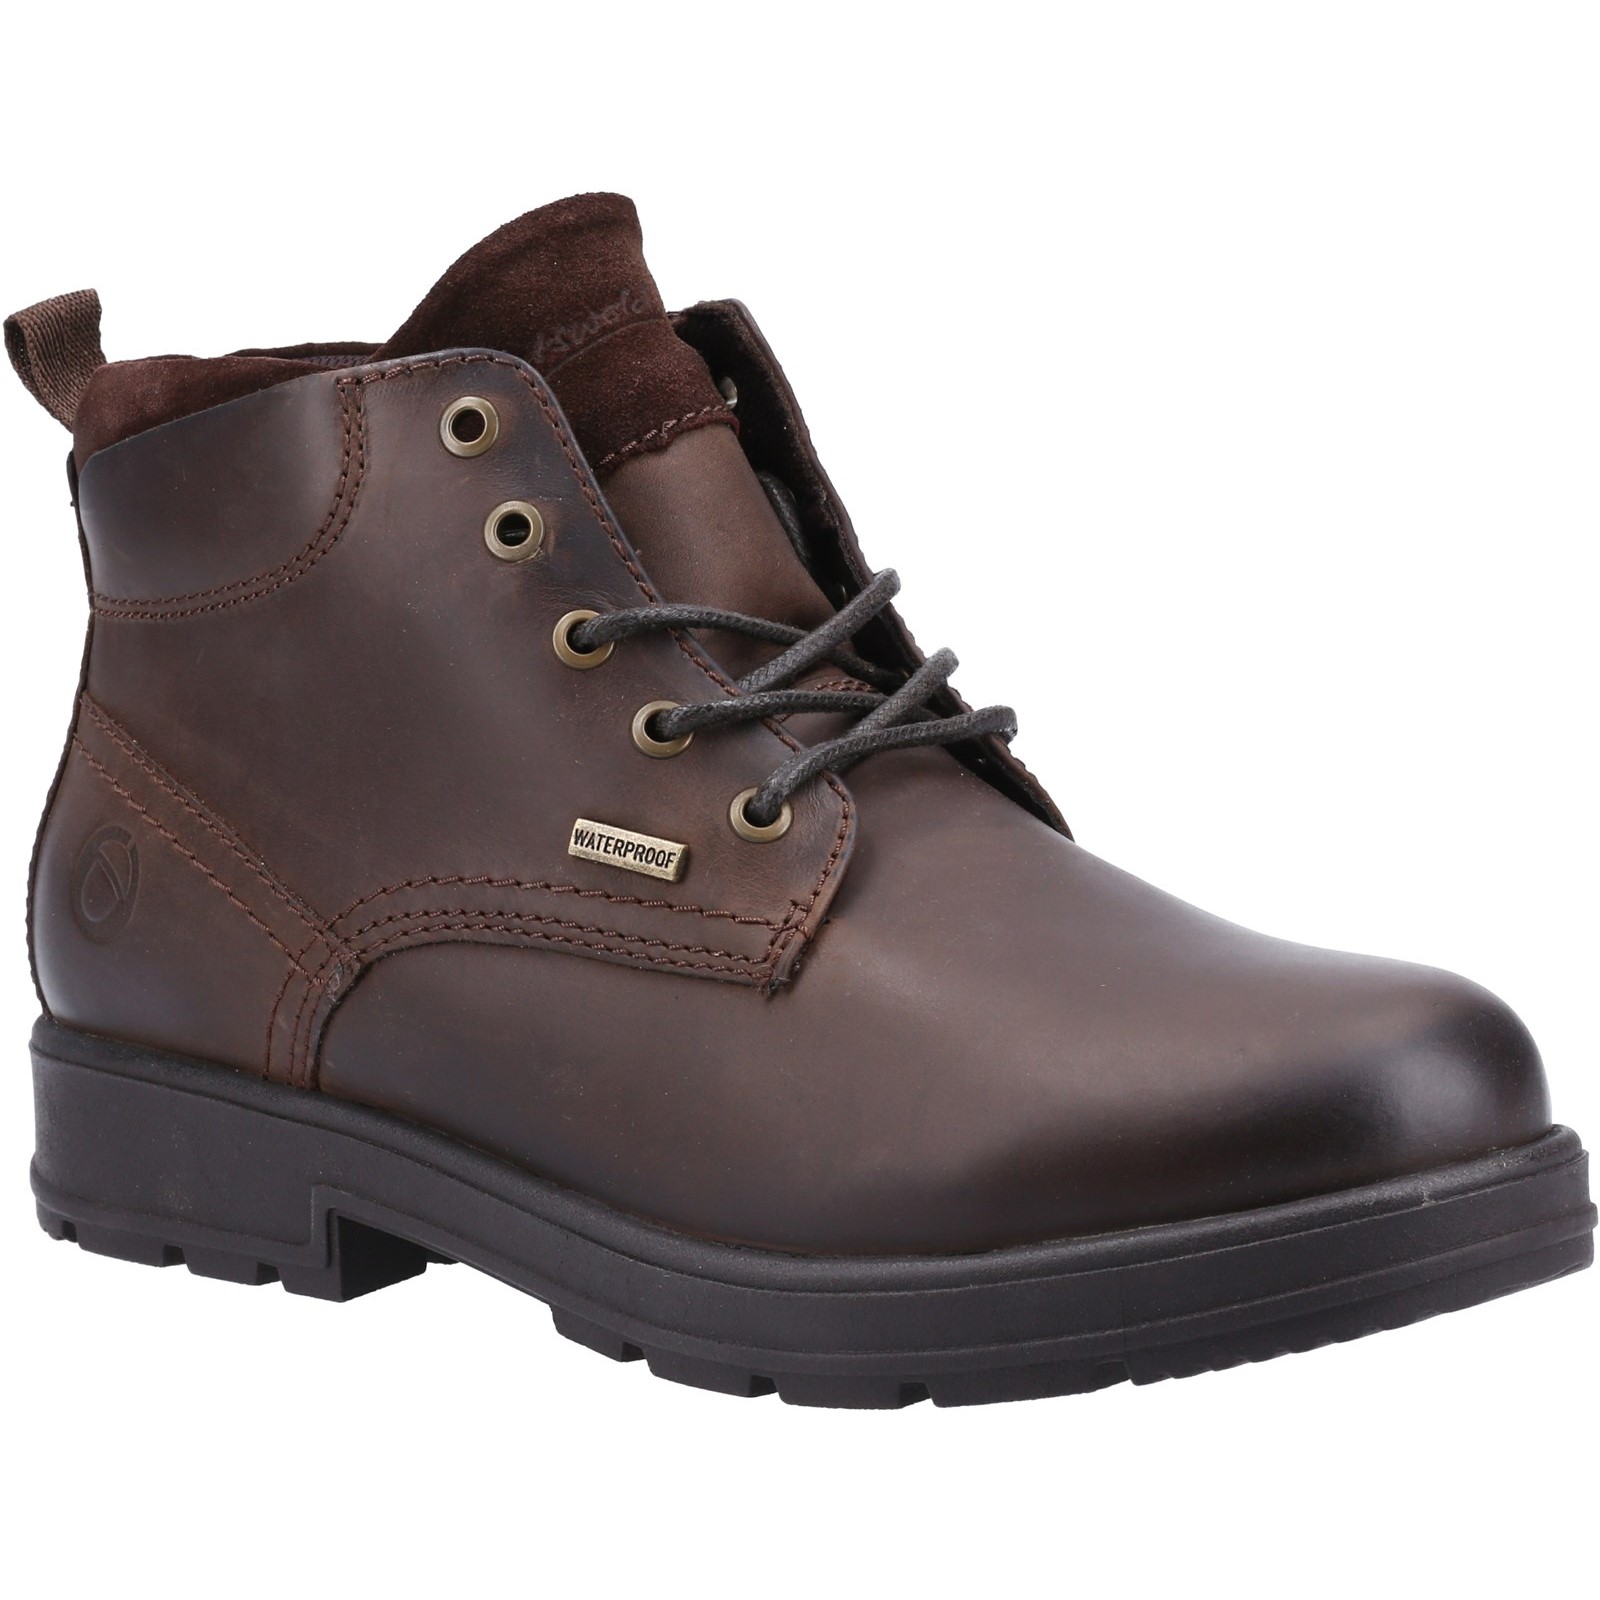 Winson Lace Up Boots